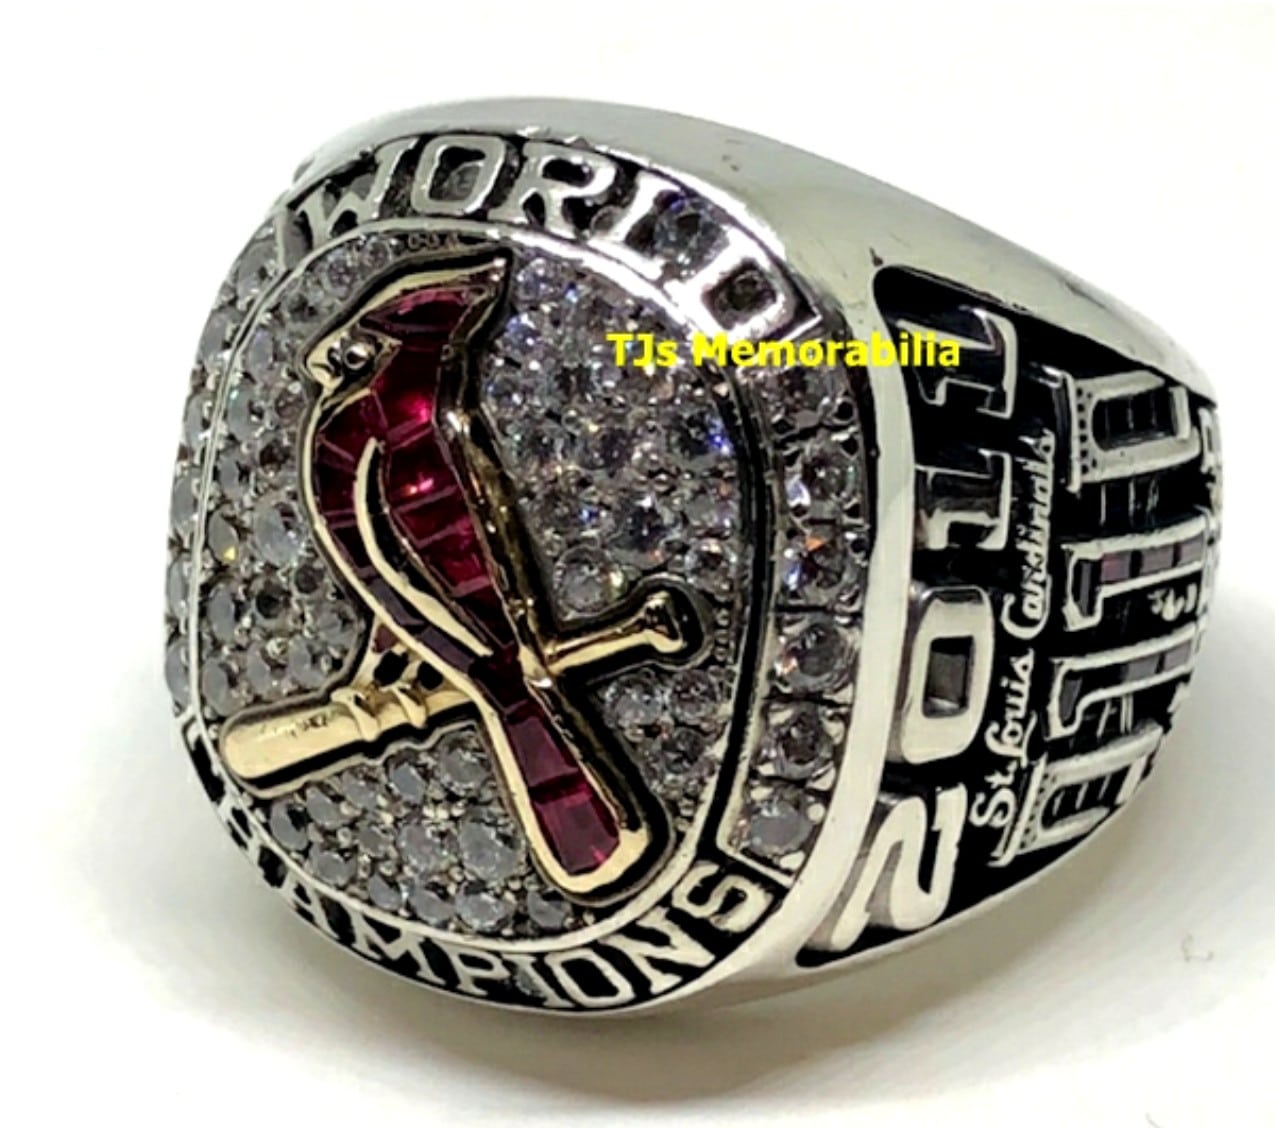 Sold at Auction: St. Louis Cardinals 2011 Championship Ring